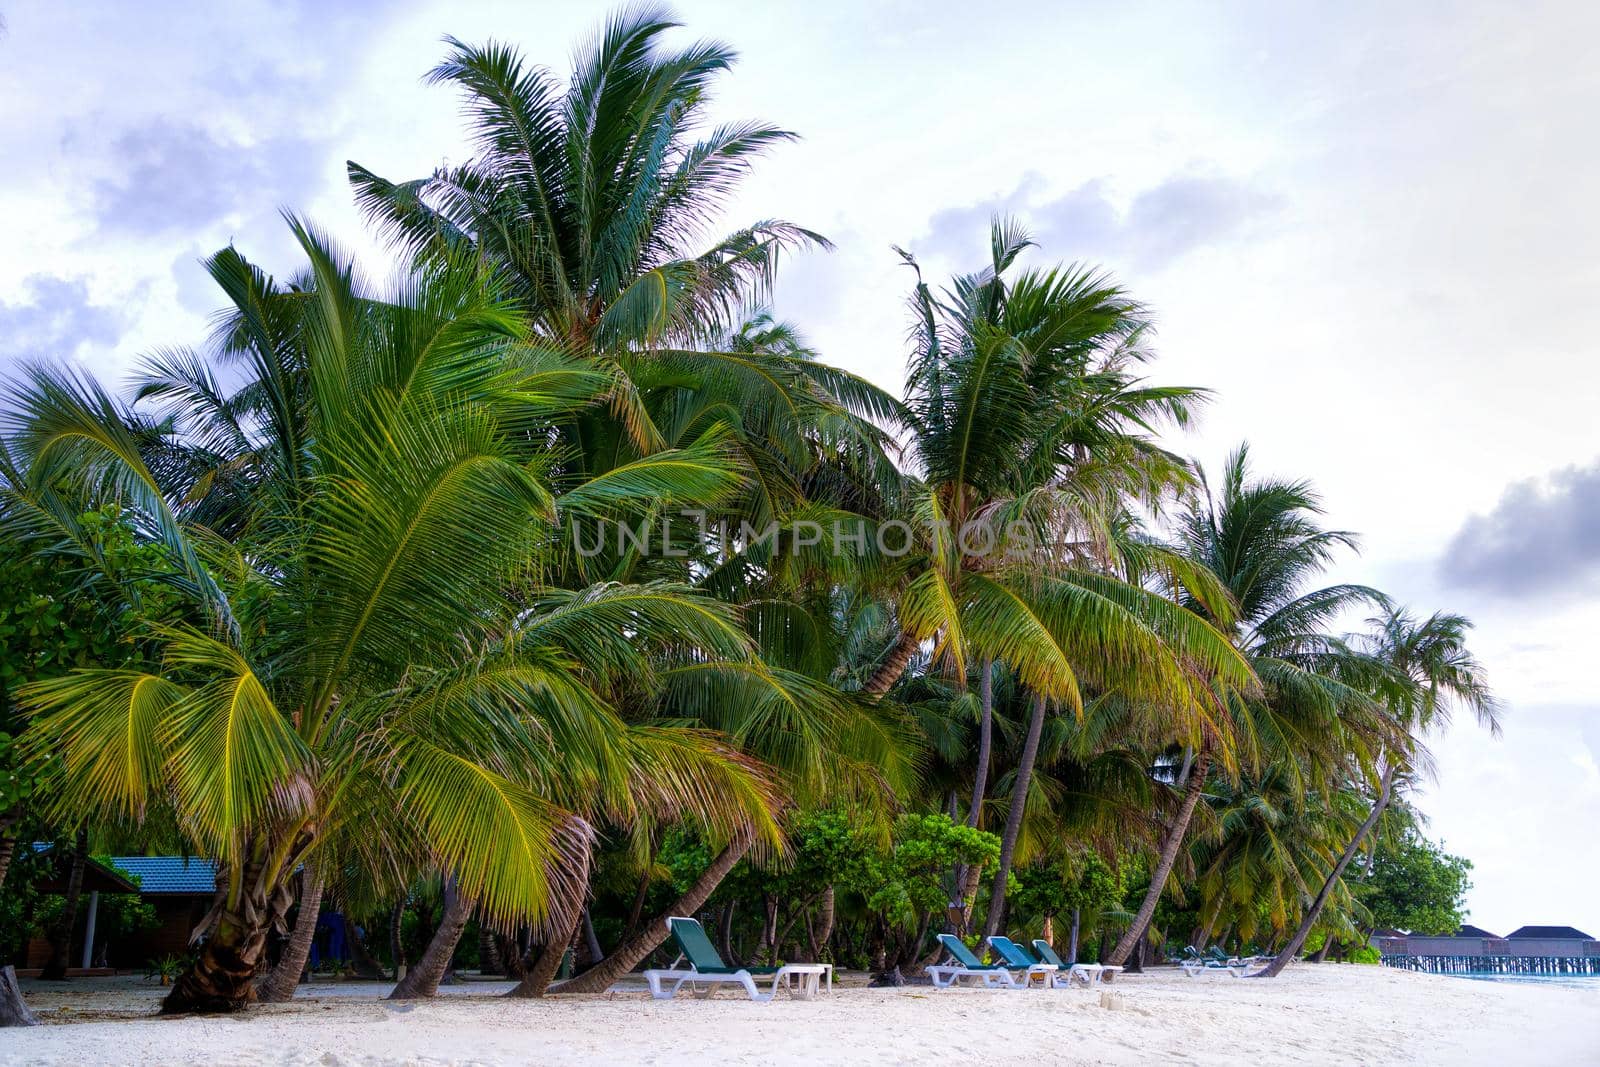 Coconut trees against the blue sky and white clouds. On the tropical coast of a secluded island.